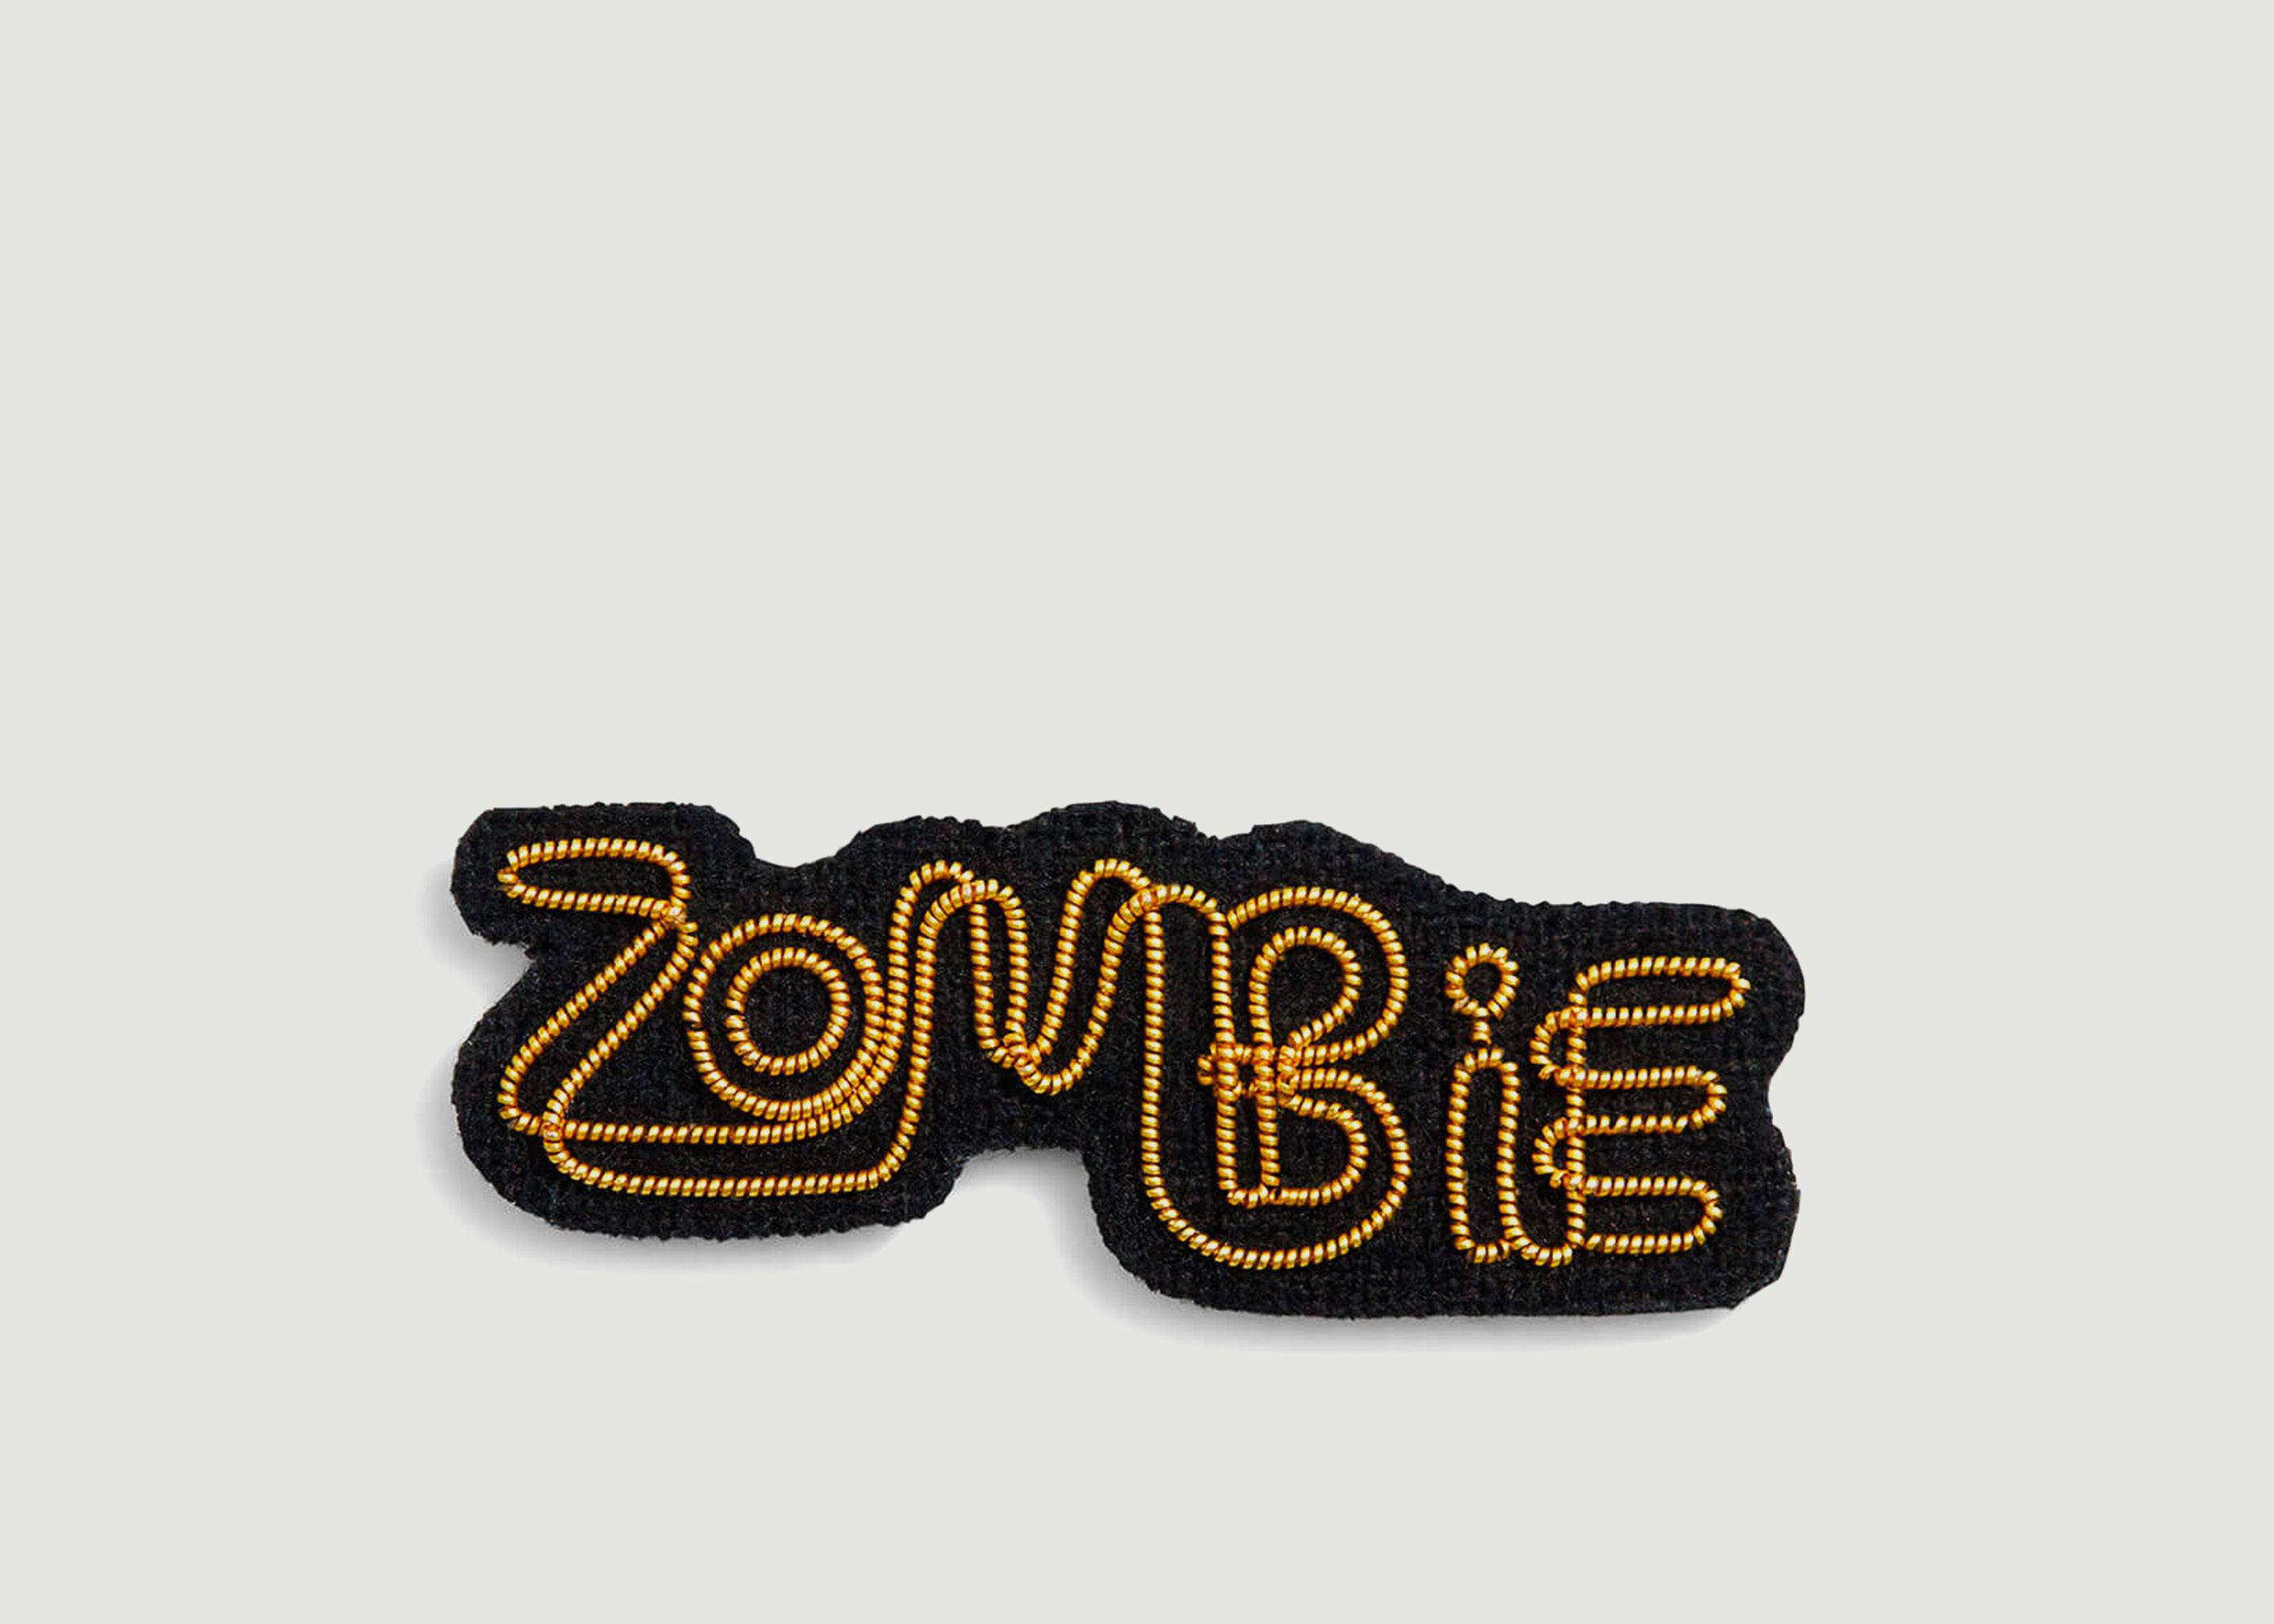 Lettering zombie brooch  - Macon & Lesquoy